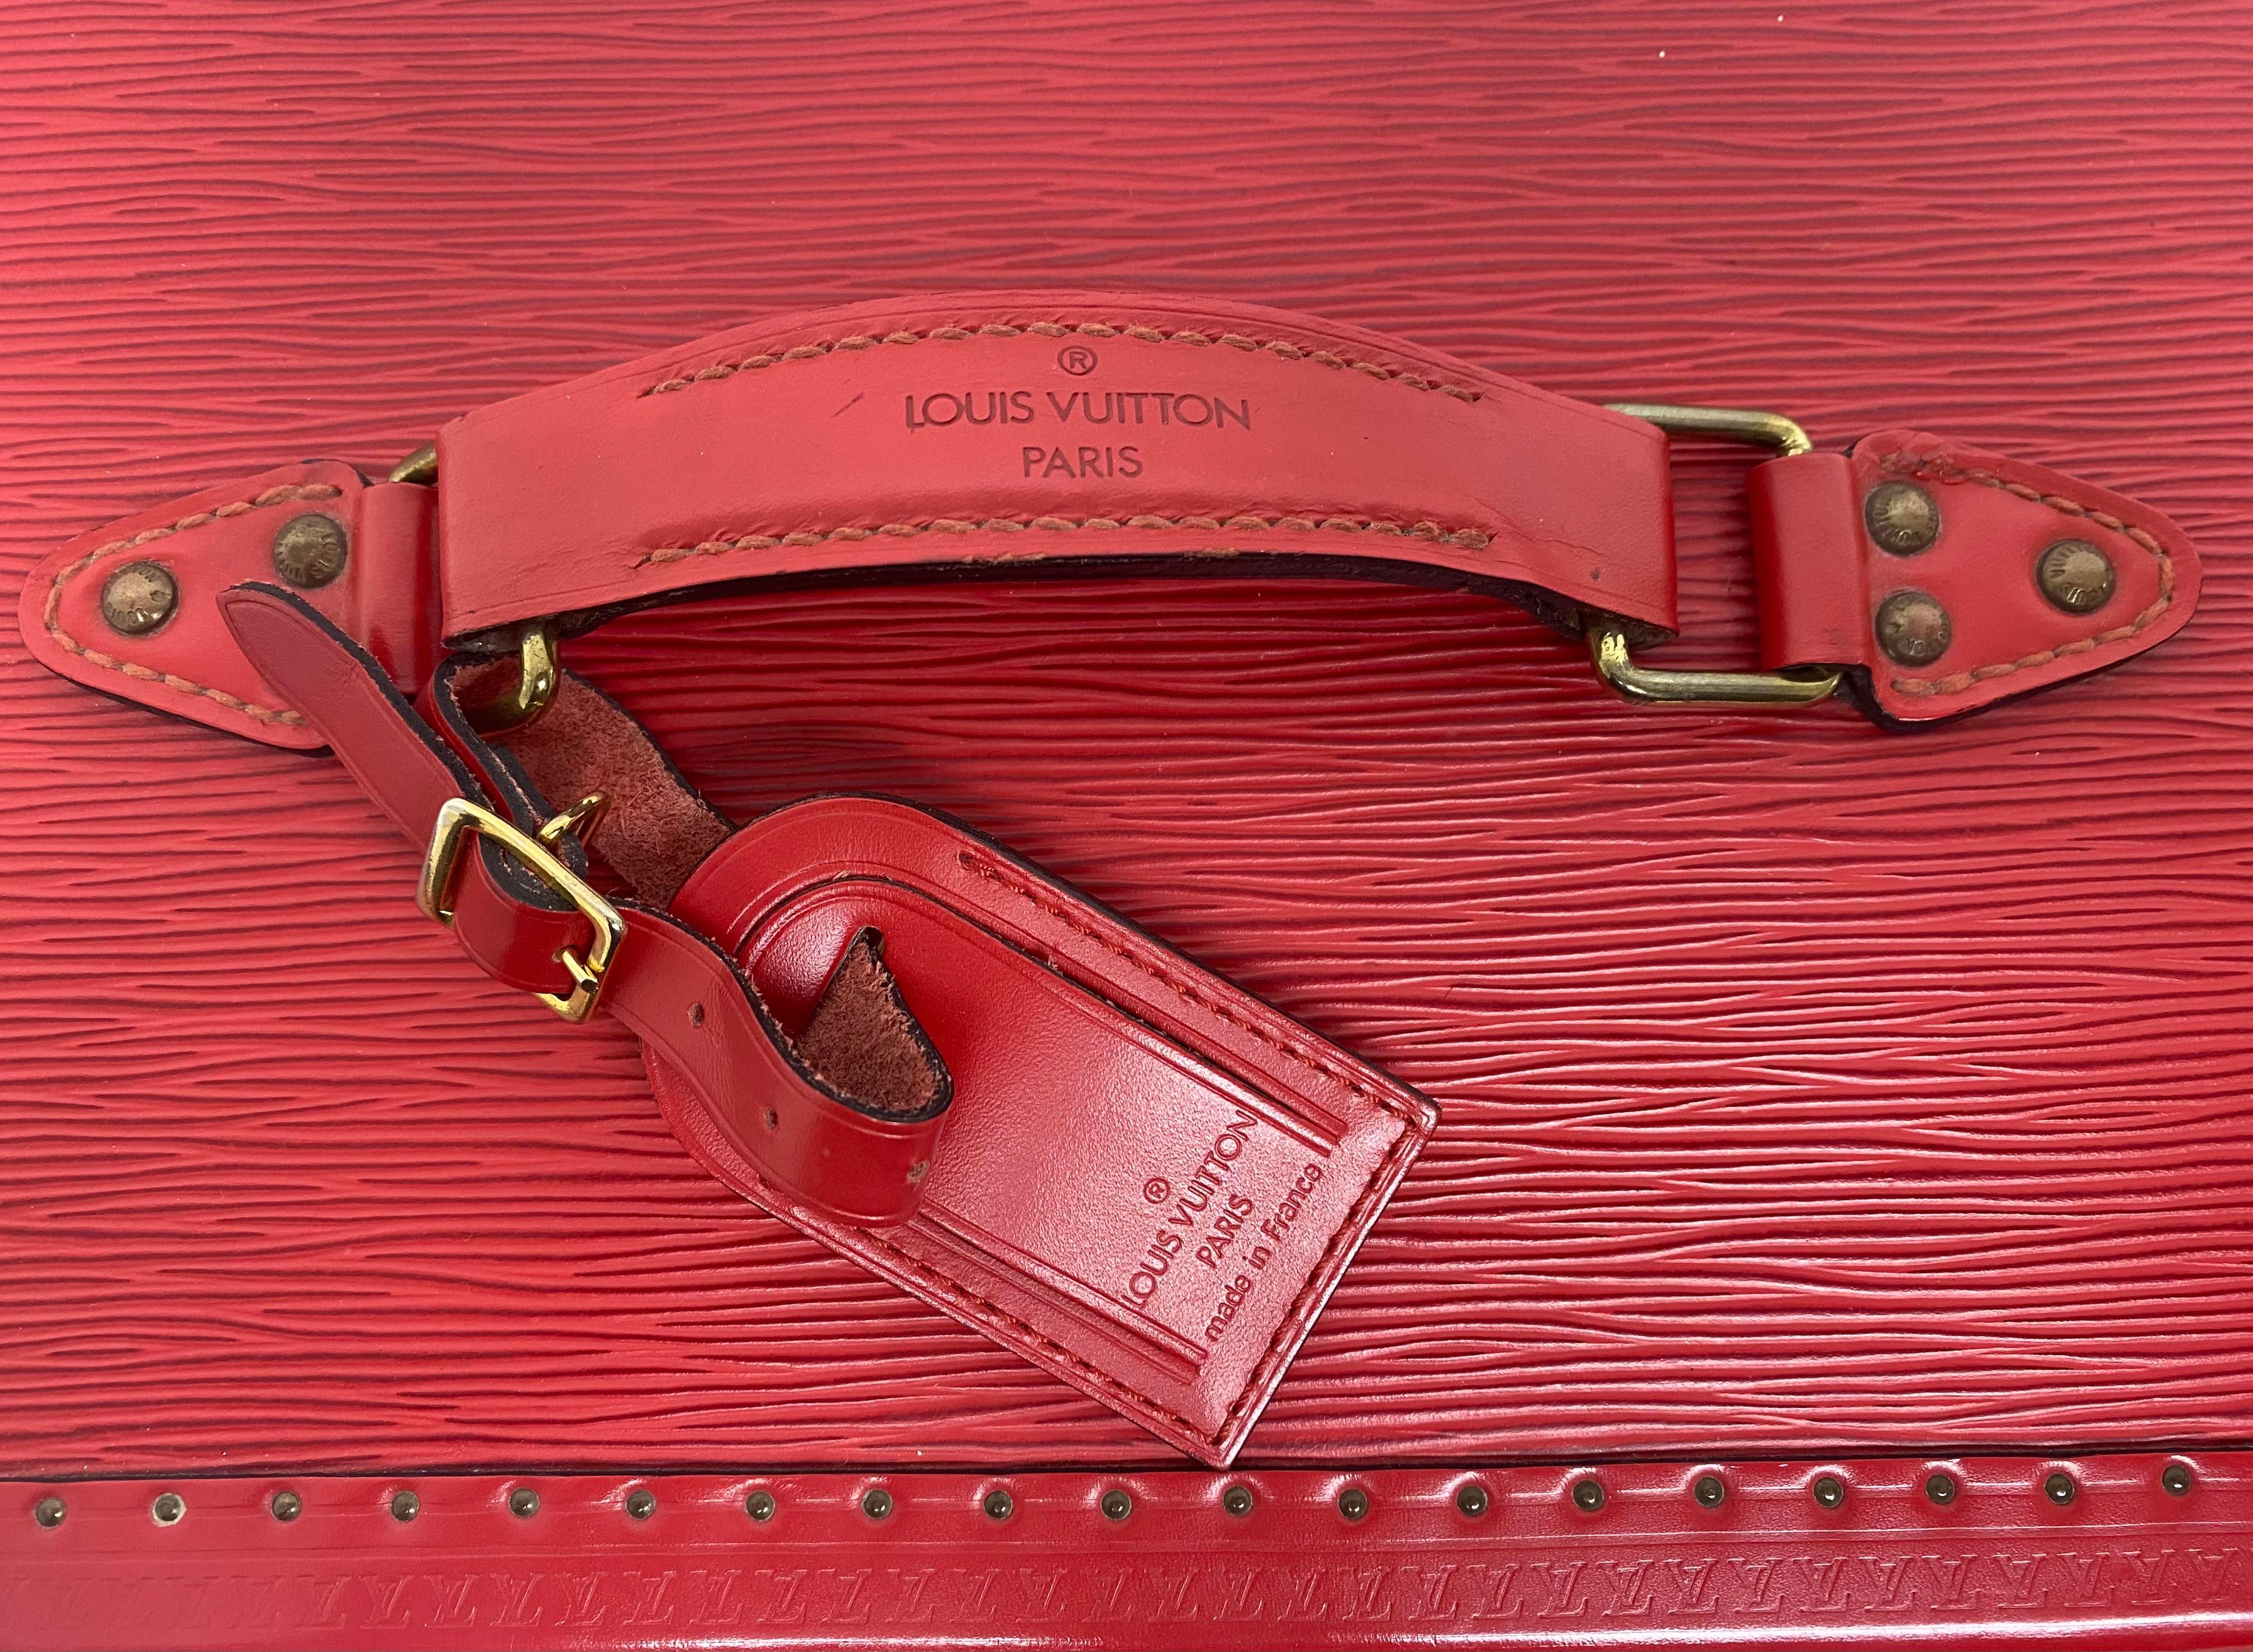 Louis Vuitton Boite à pharmacie red malle in Epi leather.
Leather borders, gilded metal hardware, key

dimensions: 25.5 x 36 x 21.5 

Very Good Conditions
marks of use, small stains, wears and marks on the angles, small wears on the handle,